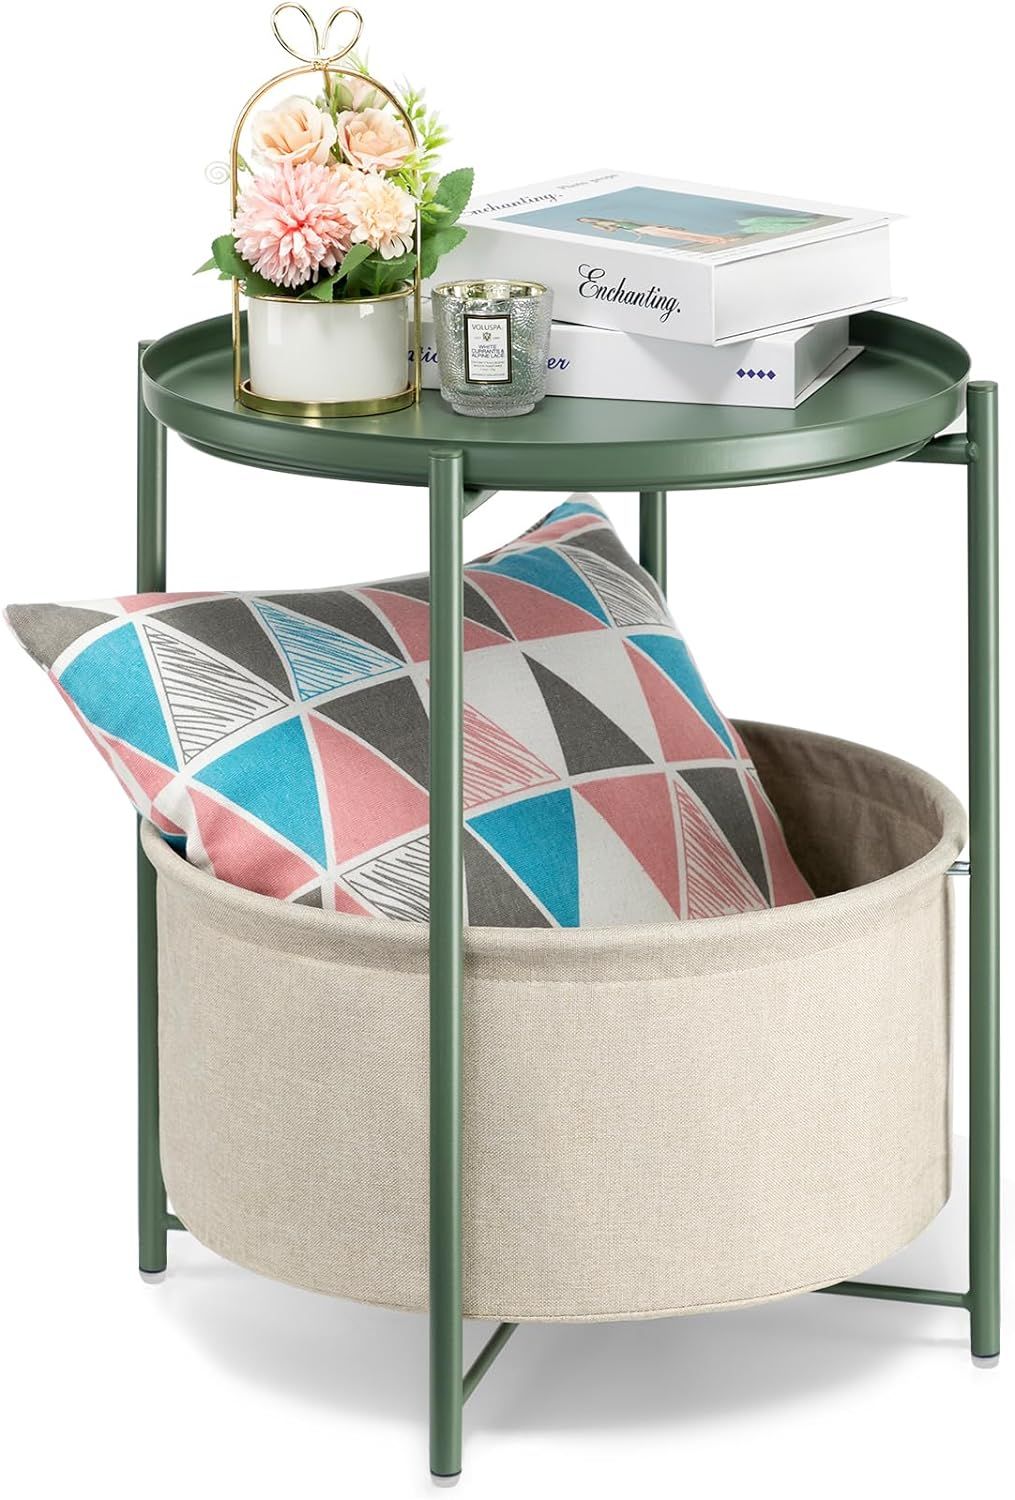 danpinera Round Side Table with Fabric Storage Basket, Metal Side Table Small Bedside Table Night... | Amazon (US)